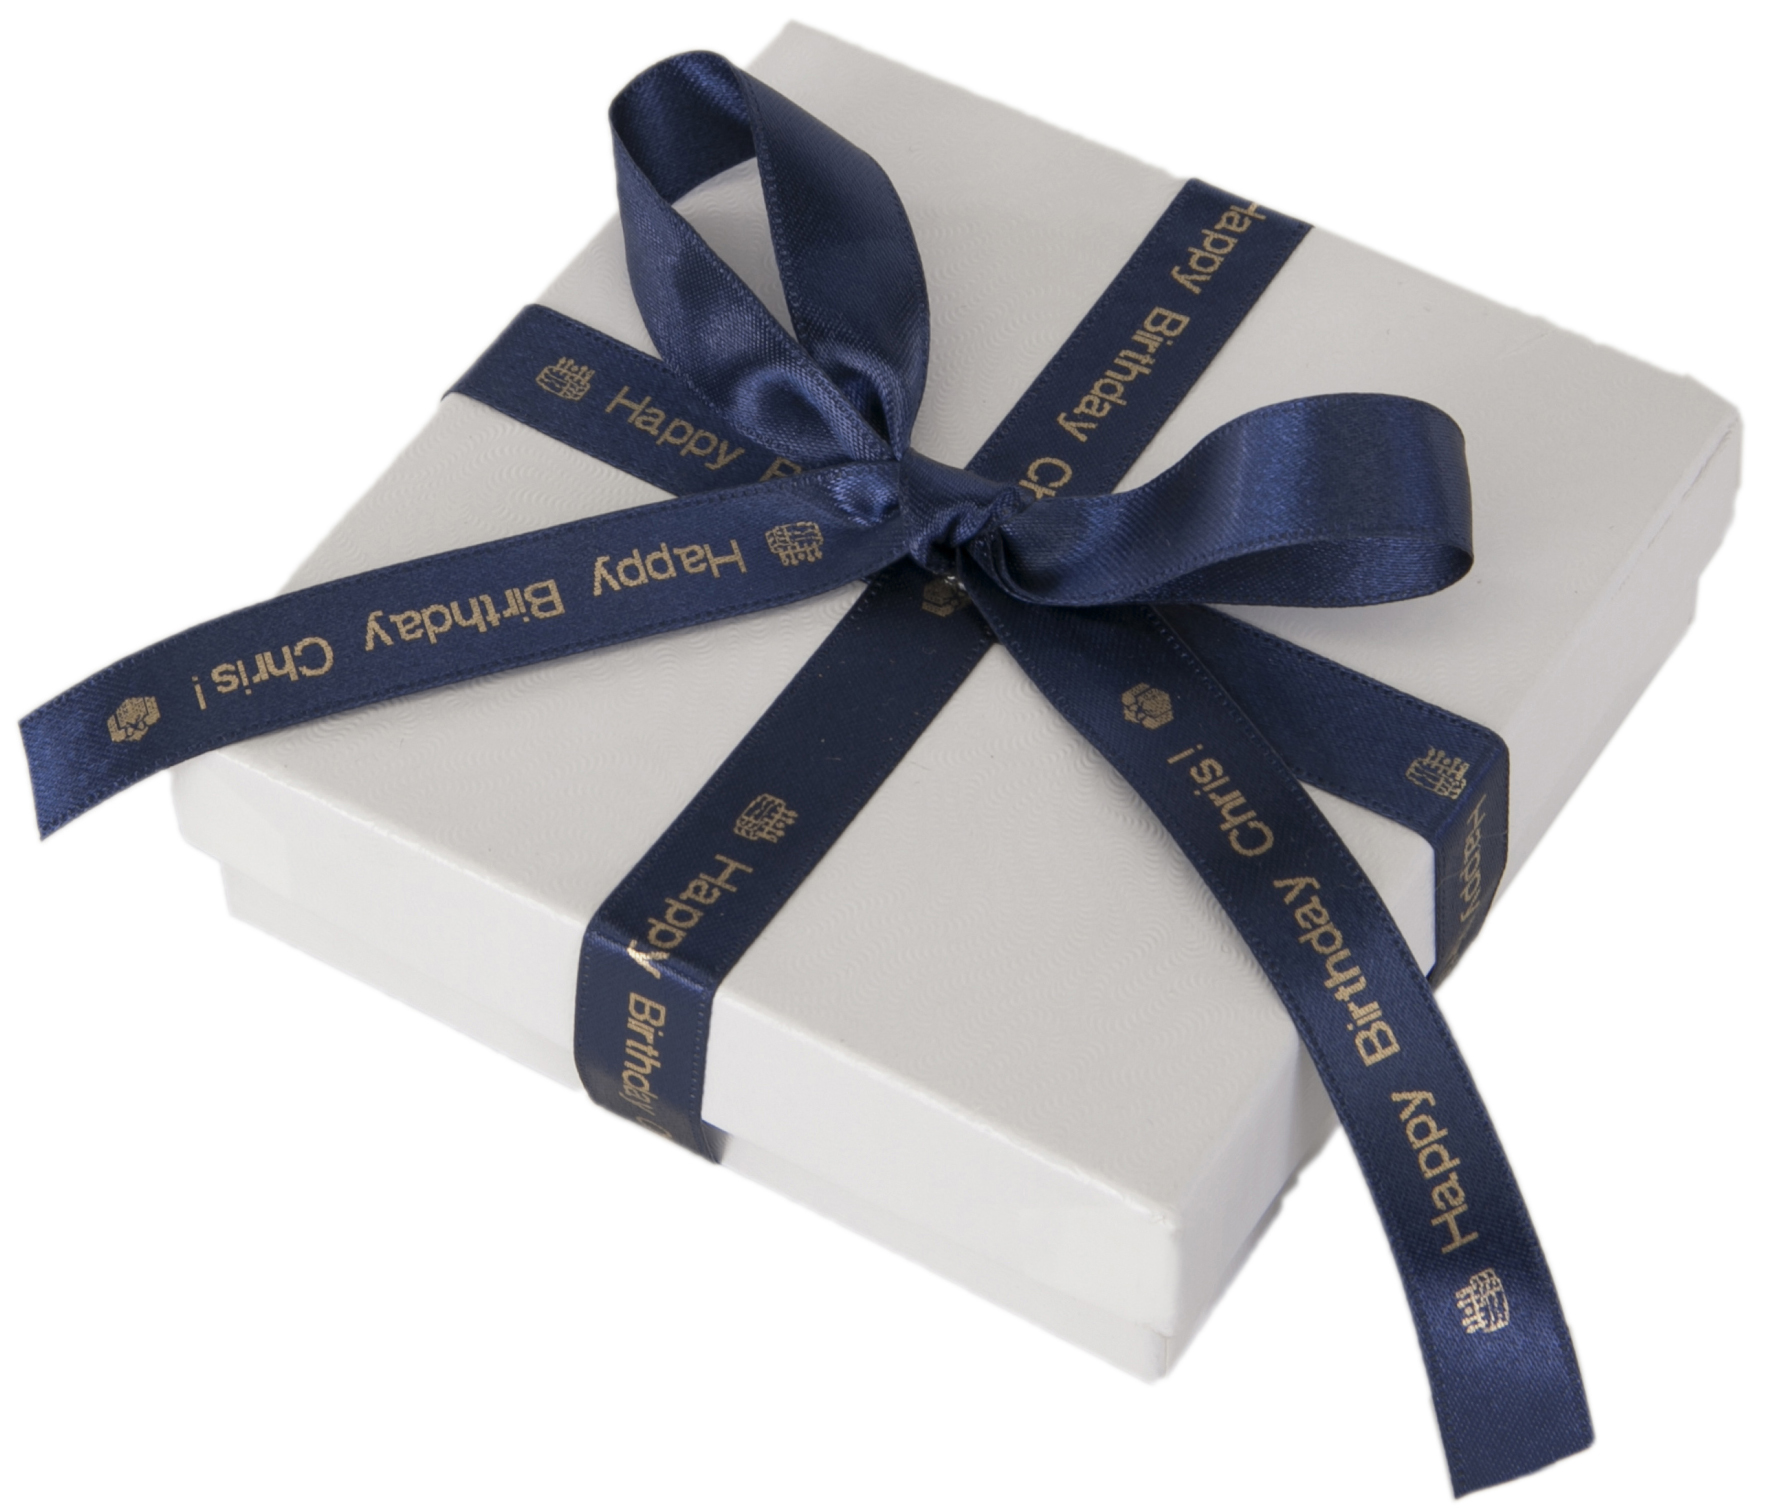 Personalized ribbon for all your special occasions thanks to the Epson LabelWorks Ribbon kit.